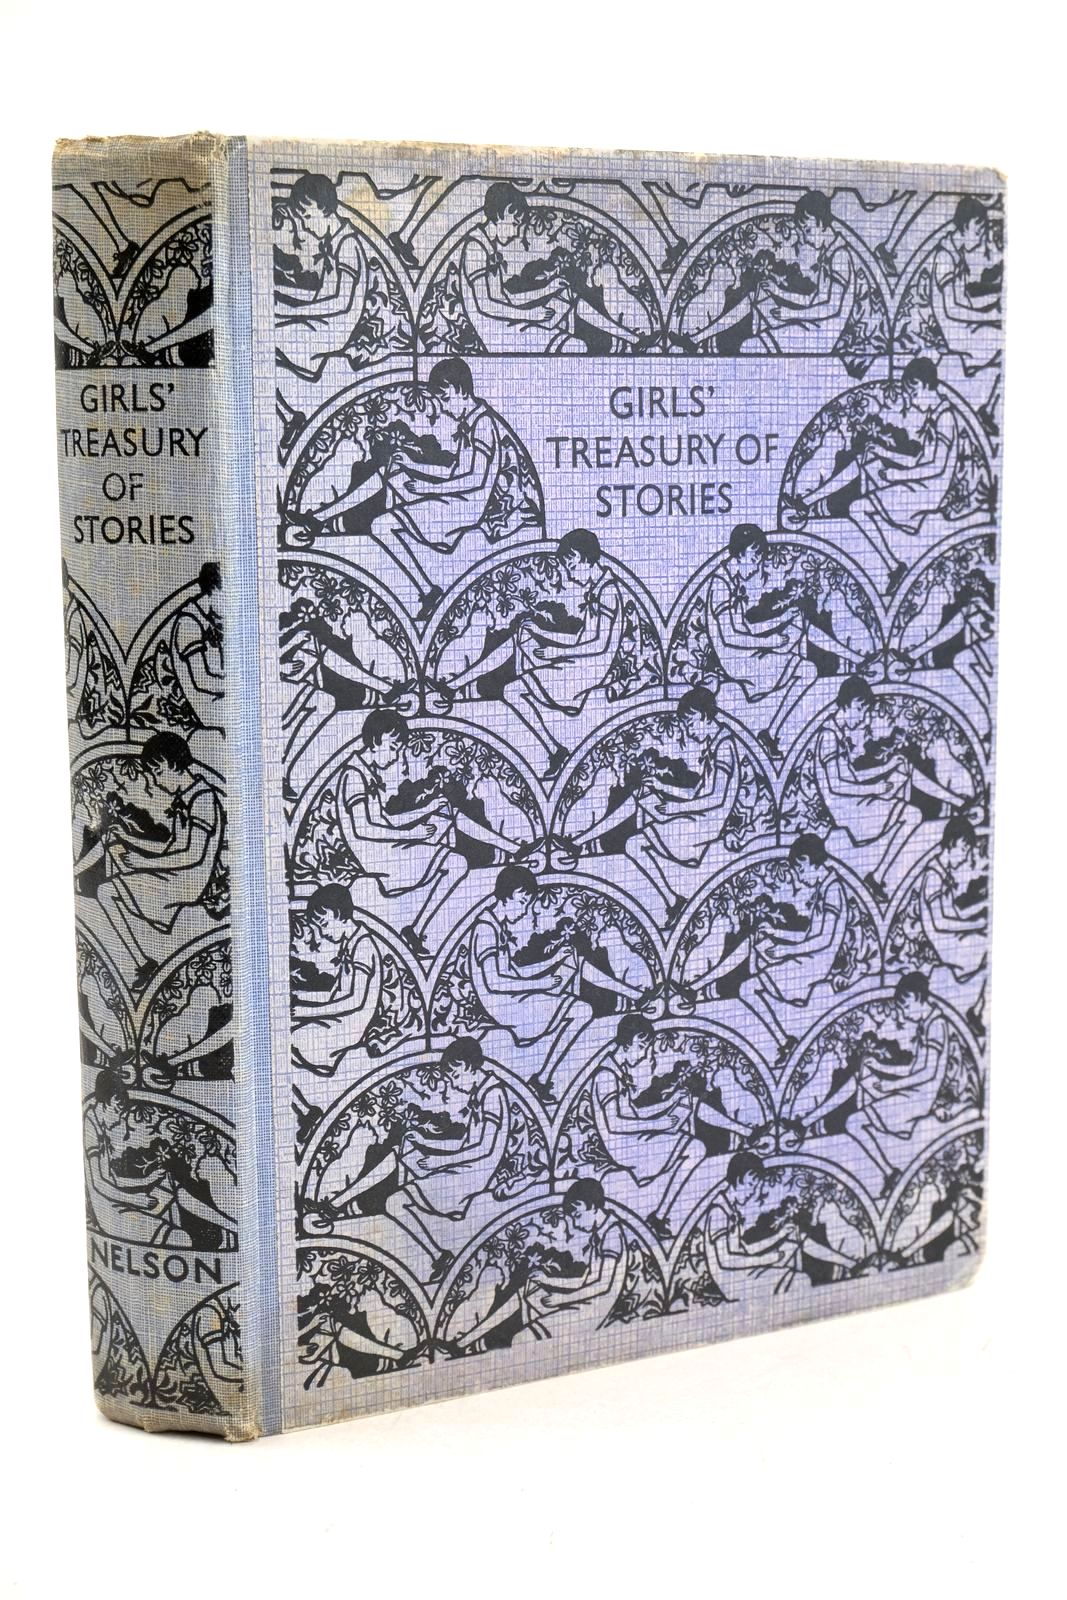 Photo of GIRLS' TREASURY OF STORIES written by Talbot, Ethel Methley, Violet M. Herbertson, Jessie Leckie Oxenham, Elsie J. et al, illustrated by Various, published by Thomas Nelson and Sons Ltd. (STOCK CODE: 1326854)  for sale by Stella & Rose's Books